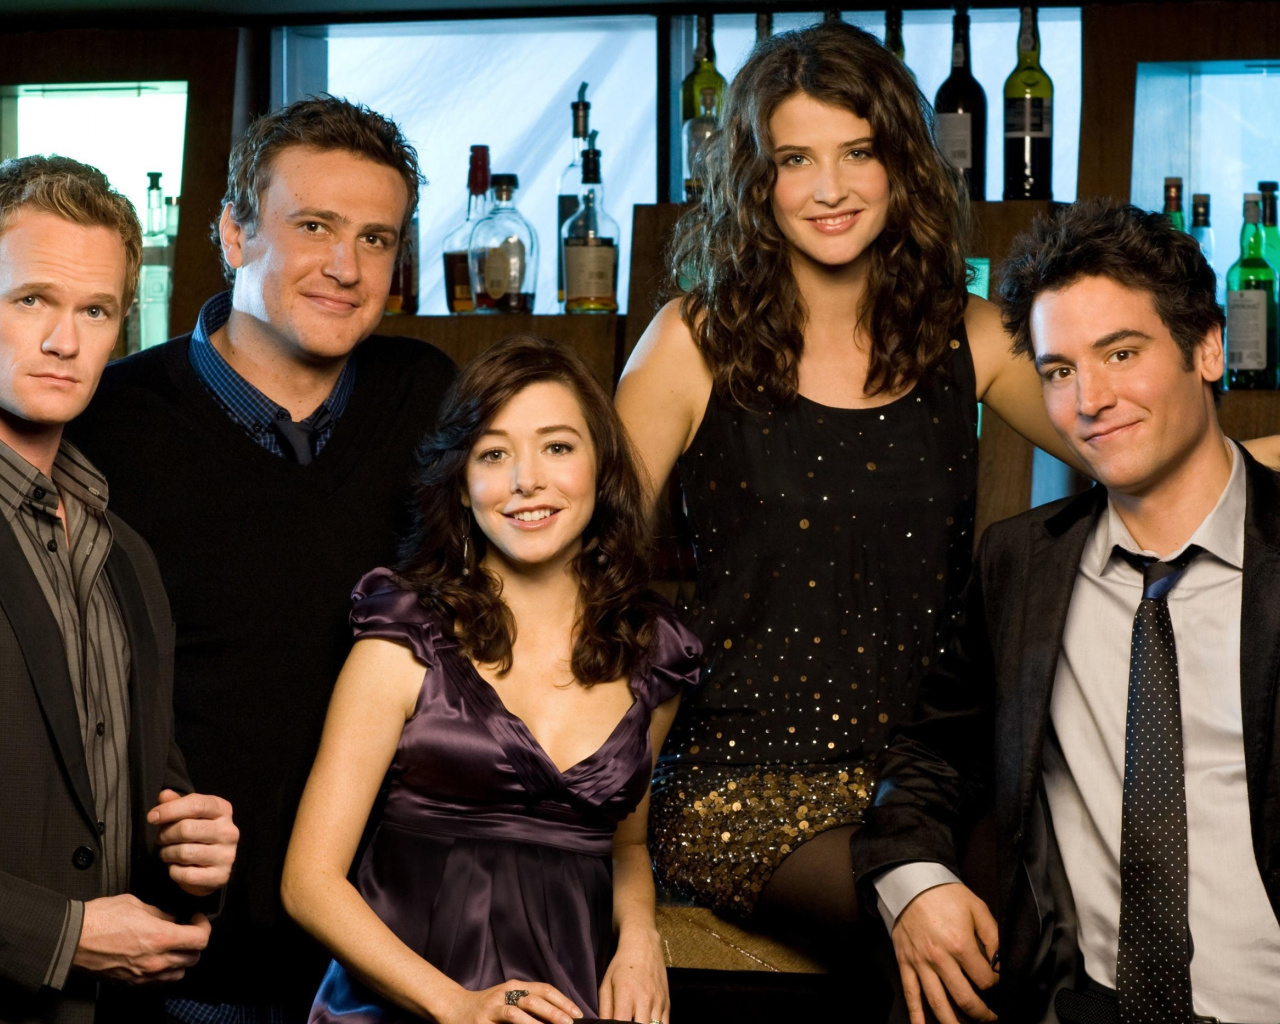 Sfondi How I Met Your Mother in Bar 1280x1024